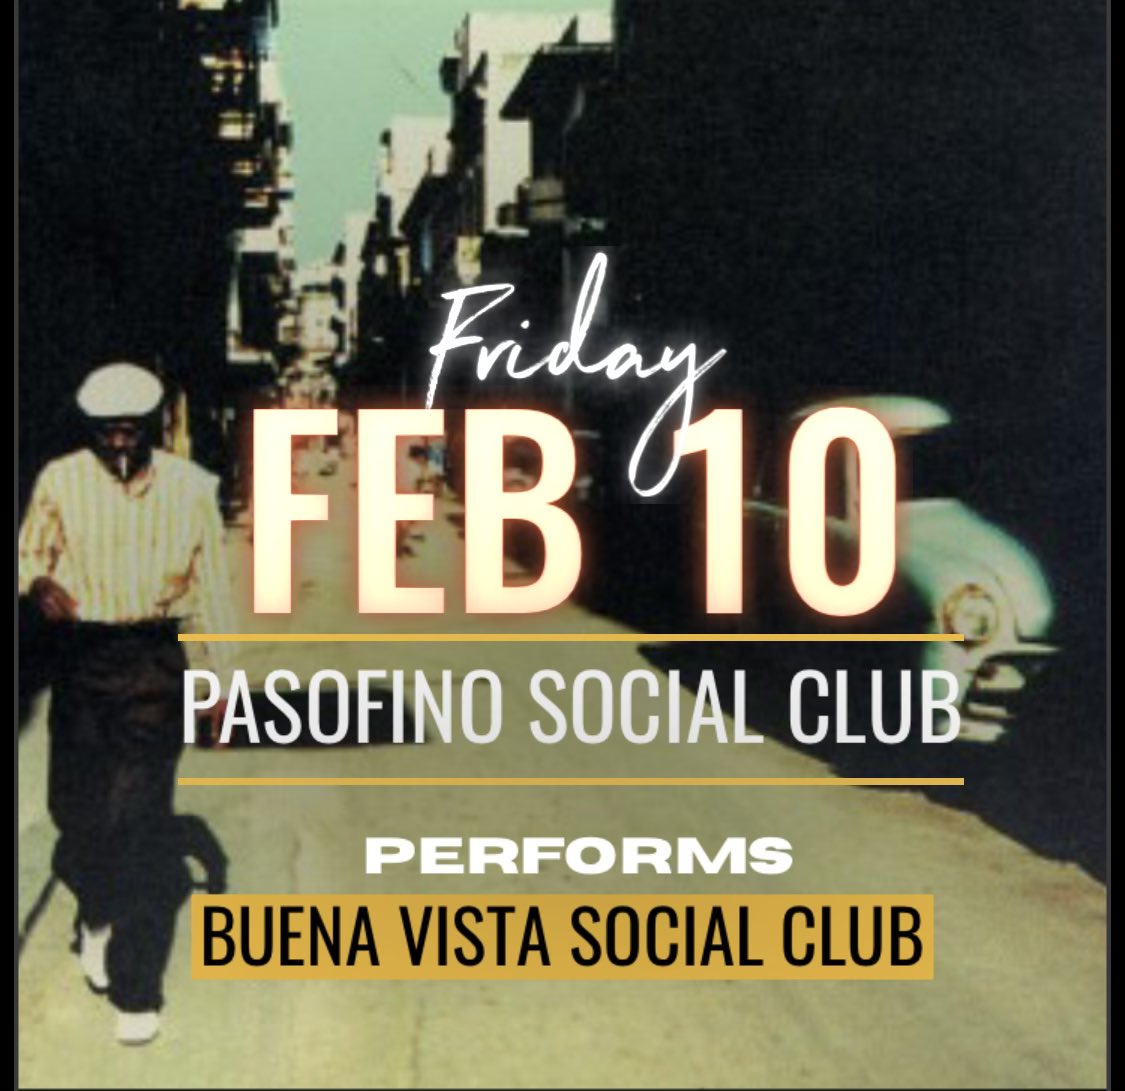 On FEB 10th Pasofino Social Club will be performing BUENA VISTA SOCIAL CLUB in it’s entirety!!! This influential album won a Grammy in 1998 and is widely adored by music lovers all over the world!!! #ctnightlife #ctsalsa#stonebridgerestaurant